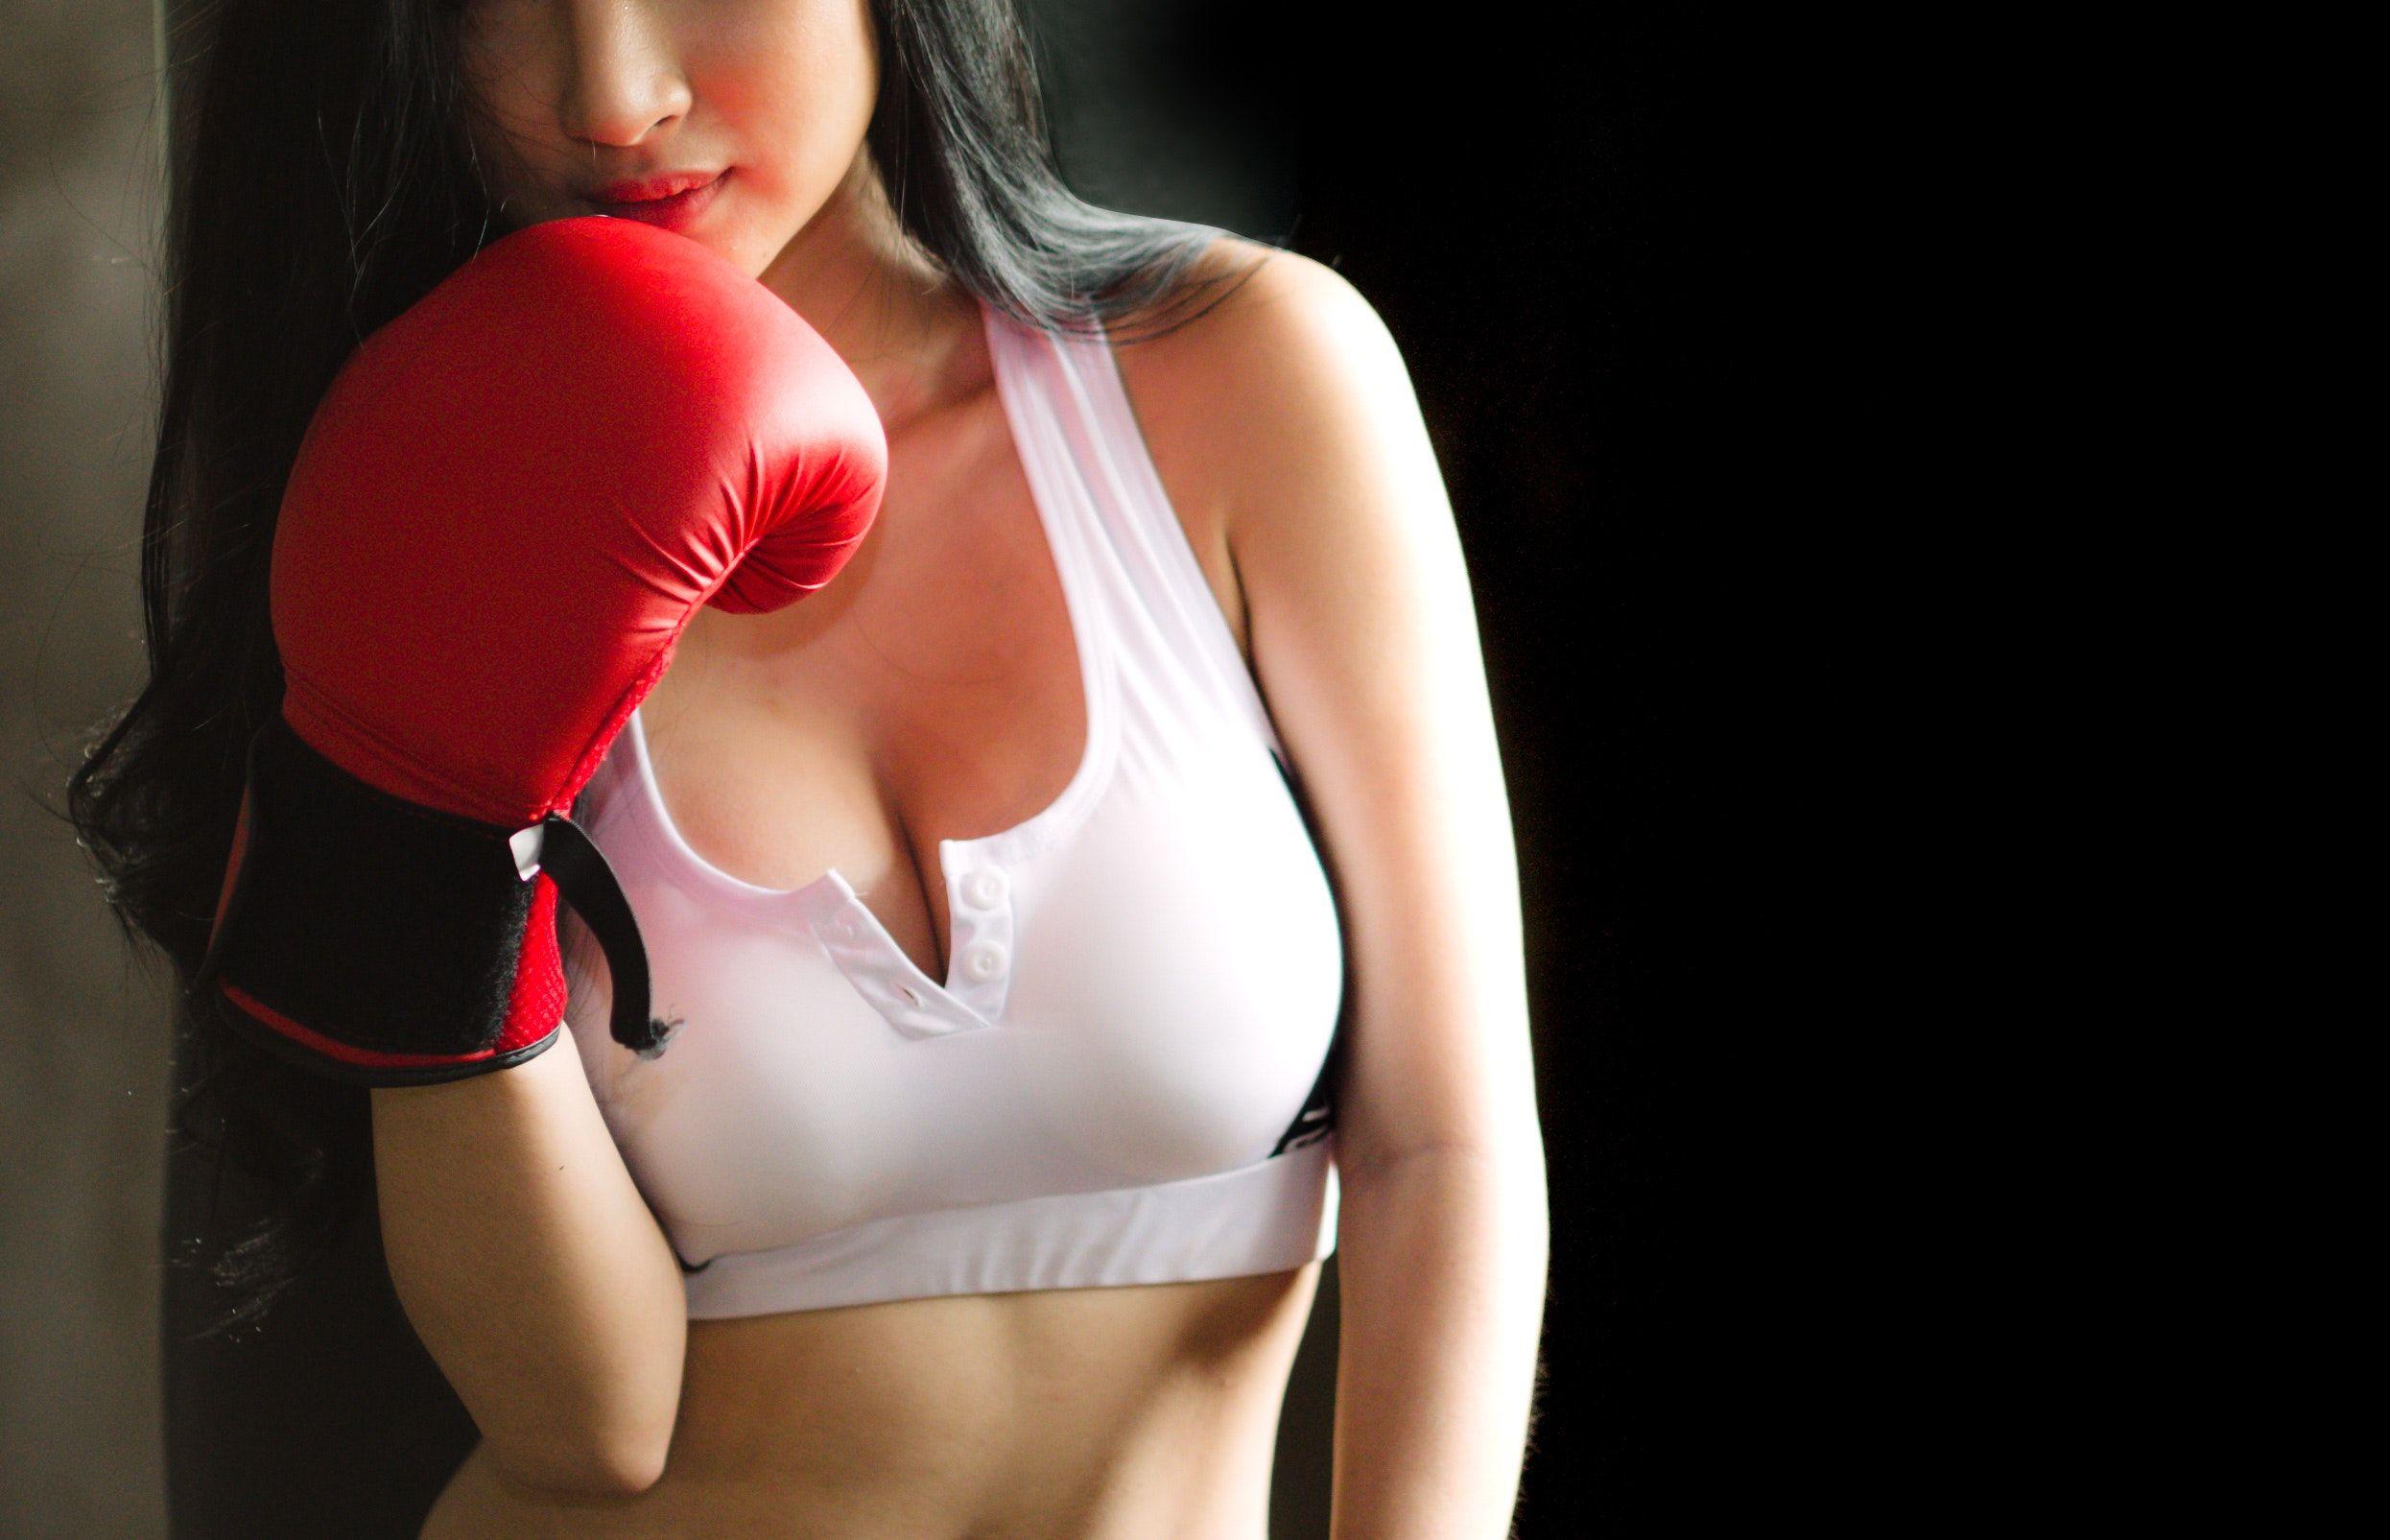 Woman in White Sports Bra and Red Boxing Glove - Free Stock Photo.